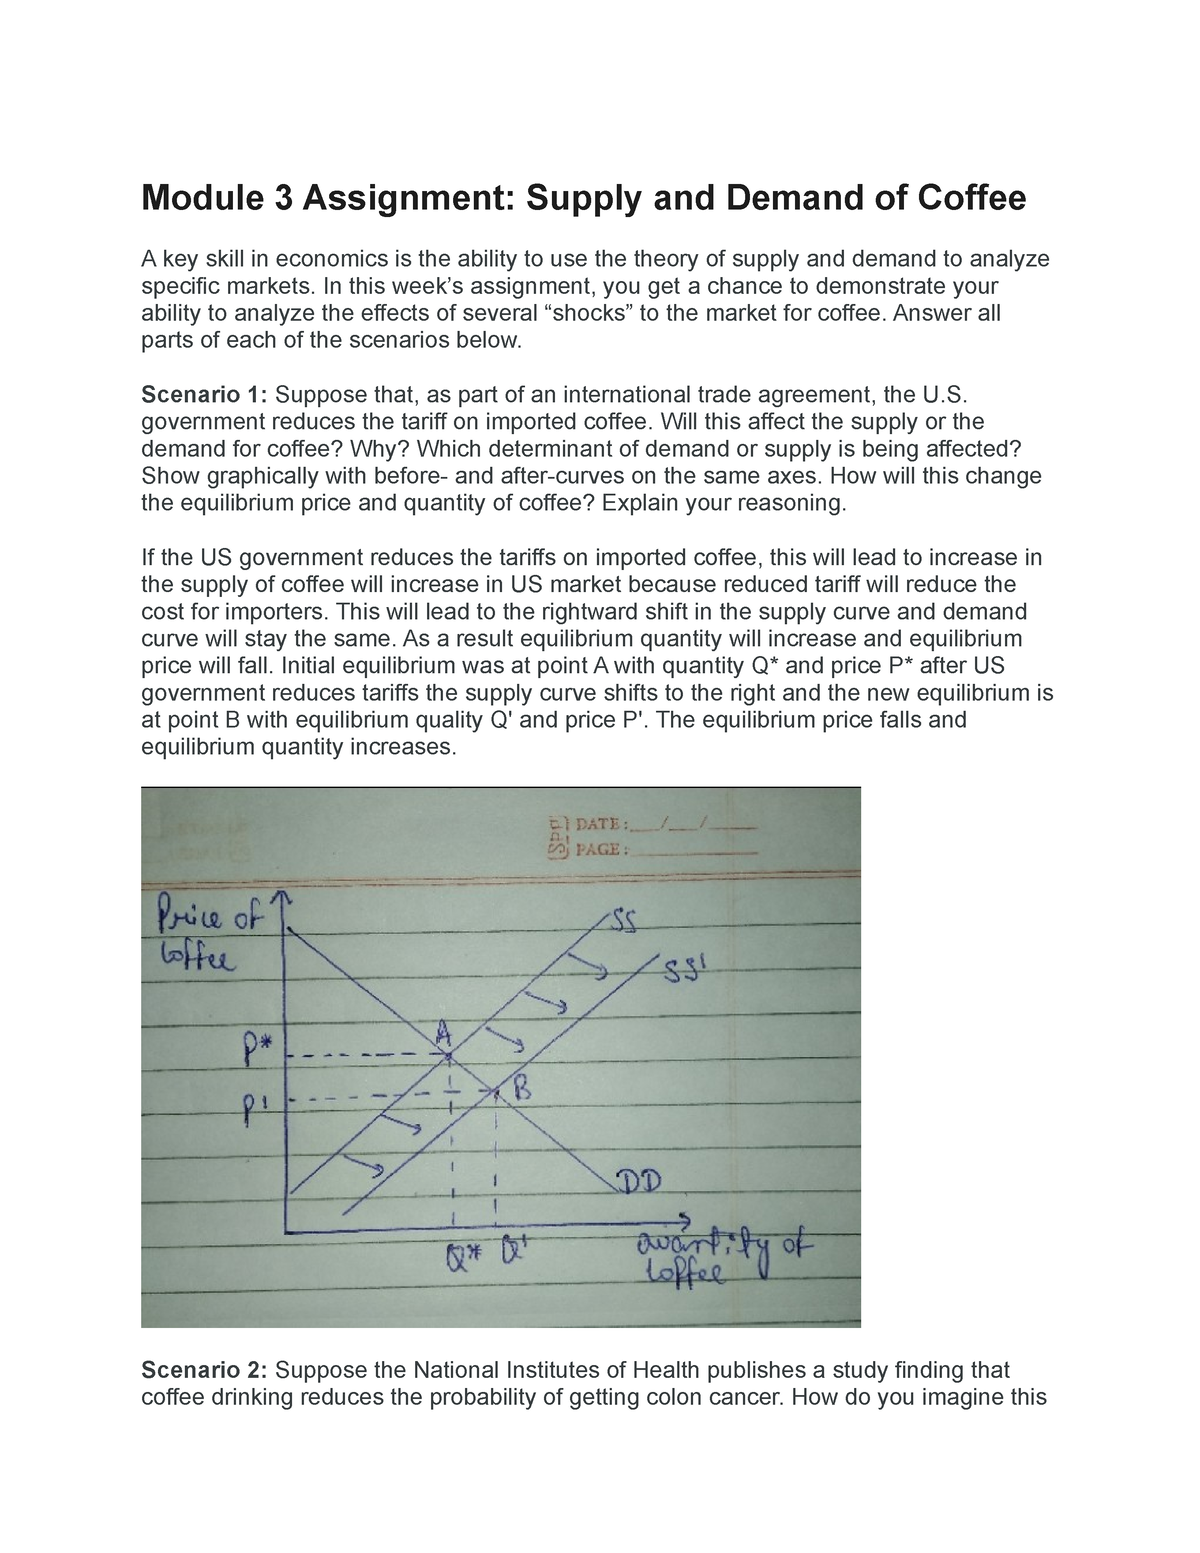 supply and demand of coffee assignment